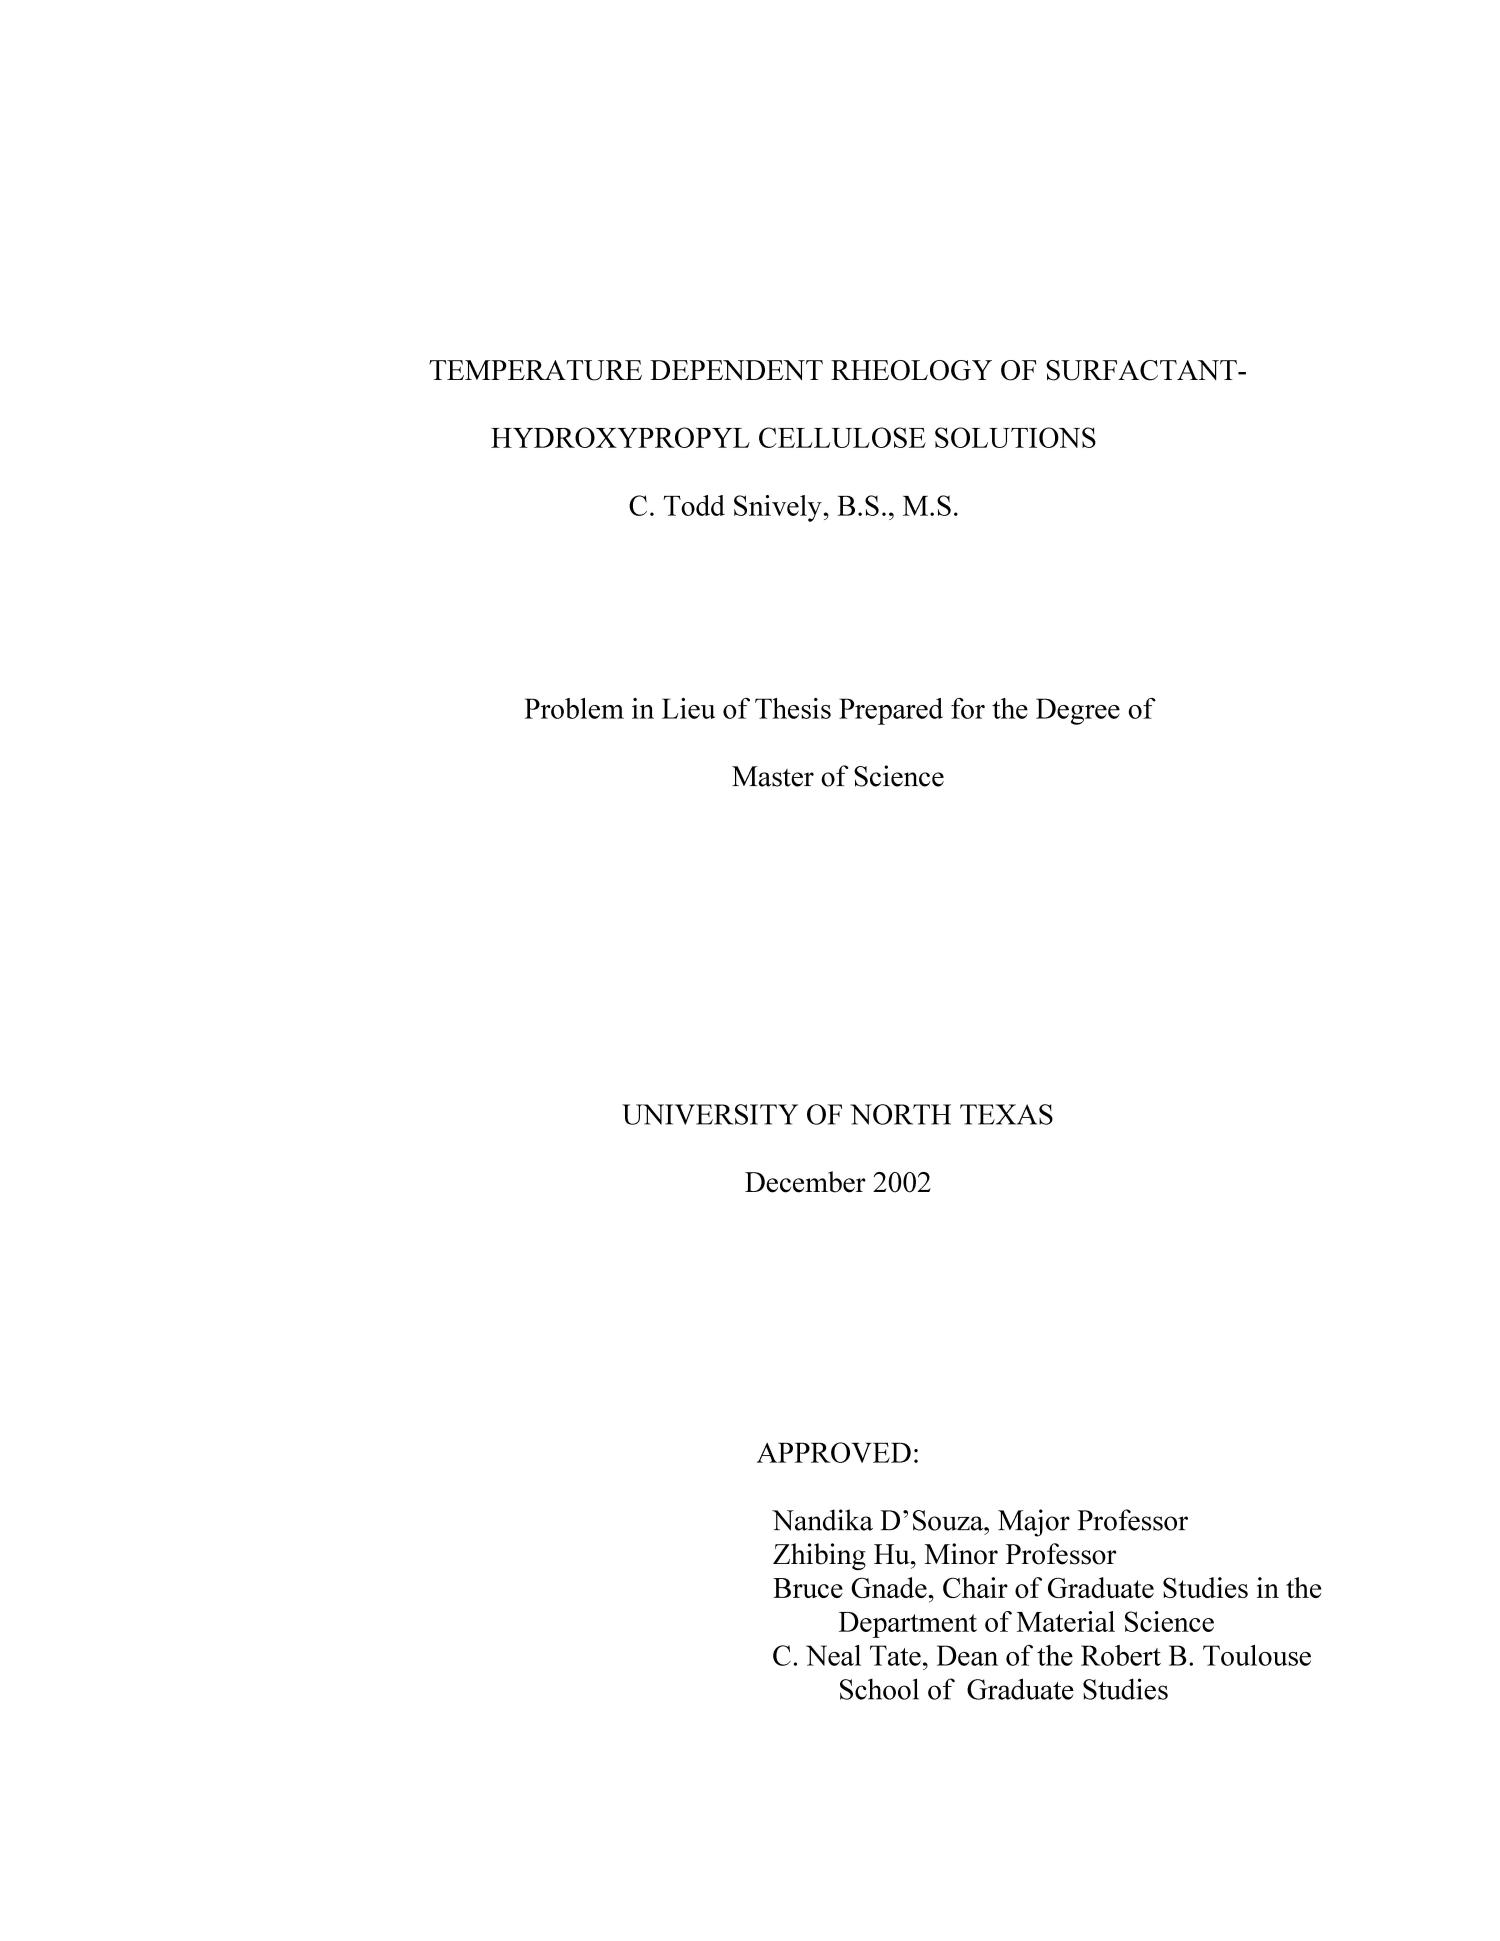 Temperature dependent rheology of surfactant-hydroxypropyl cellulose solutions.
                                                
                                                    Title Page
                                                